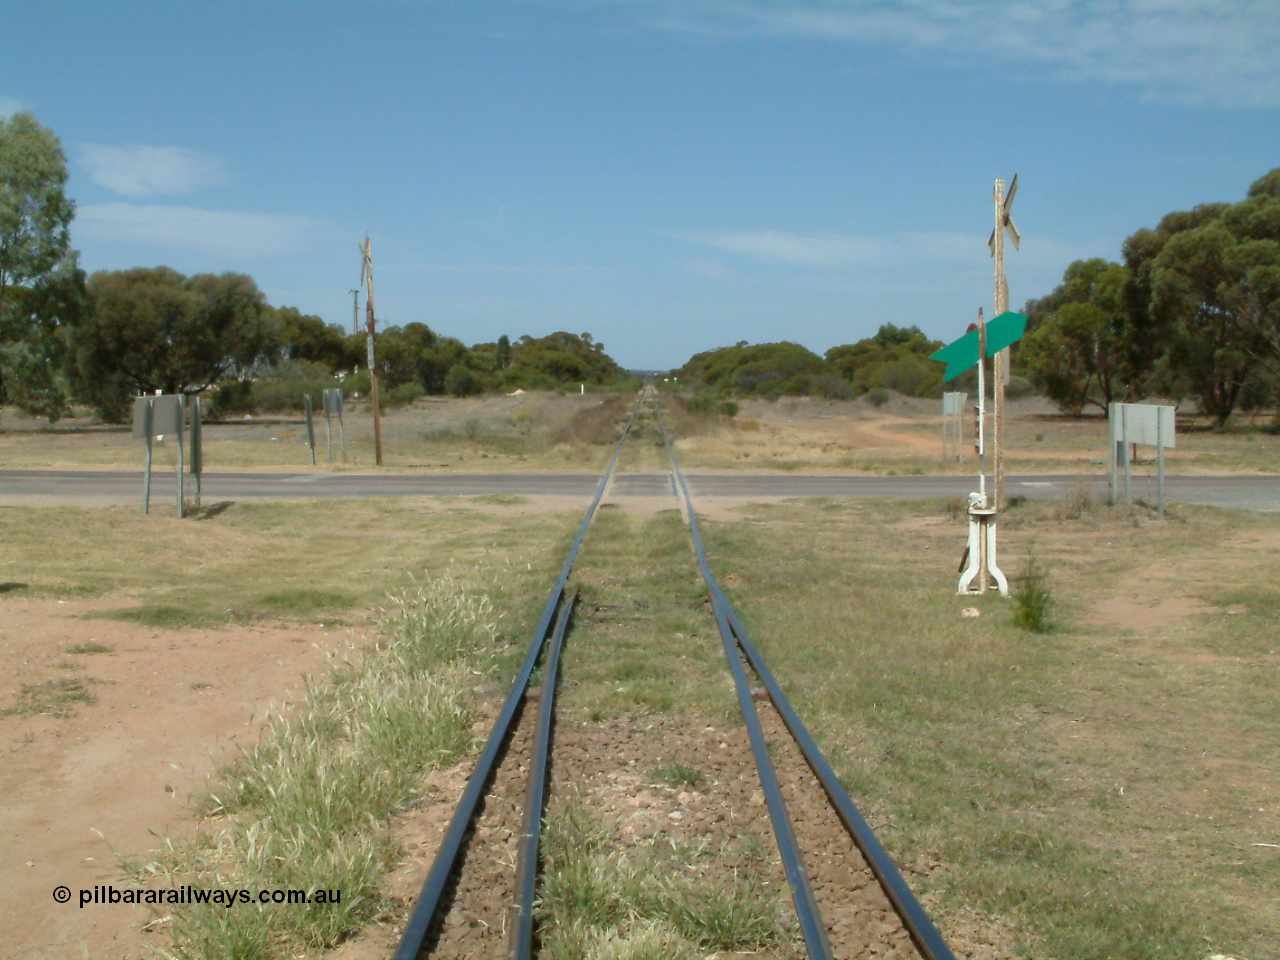 030405 133514
Wudinna, track view looking south across the grade crossing for Naylor Tce with the toe of the siding points and point lever with indicator, 5th April 2003.
